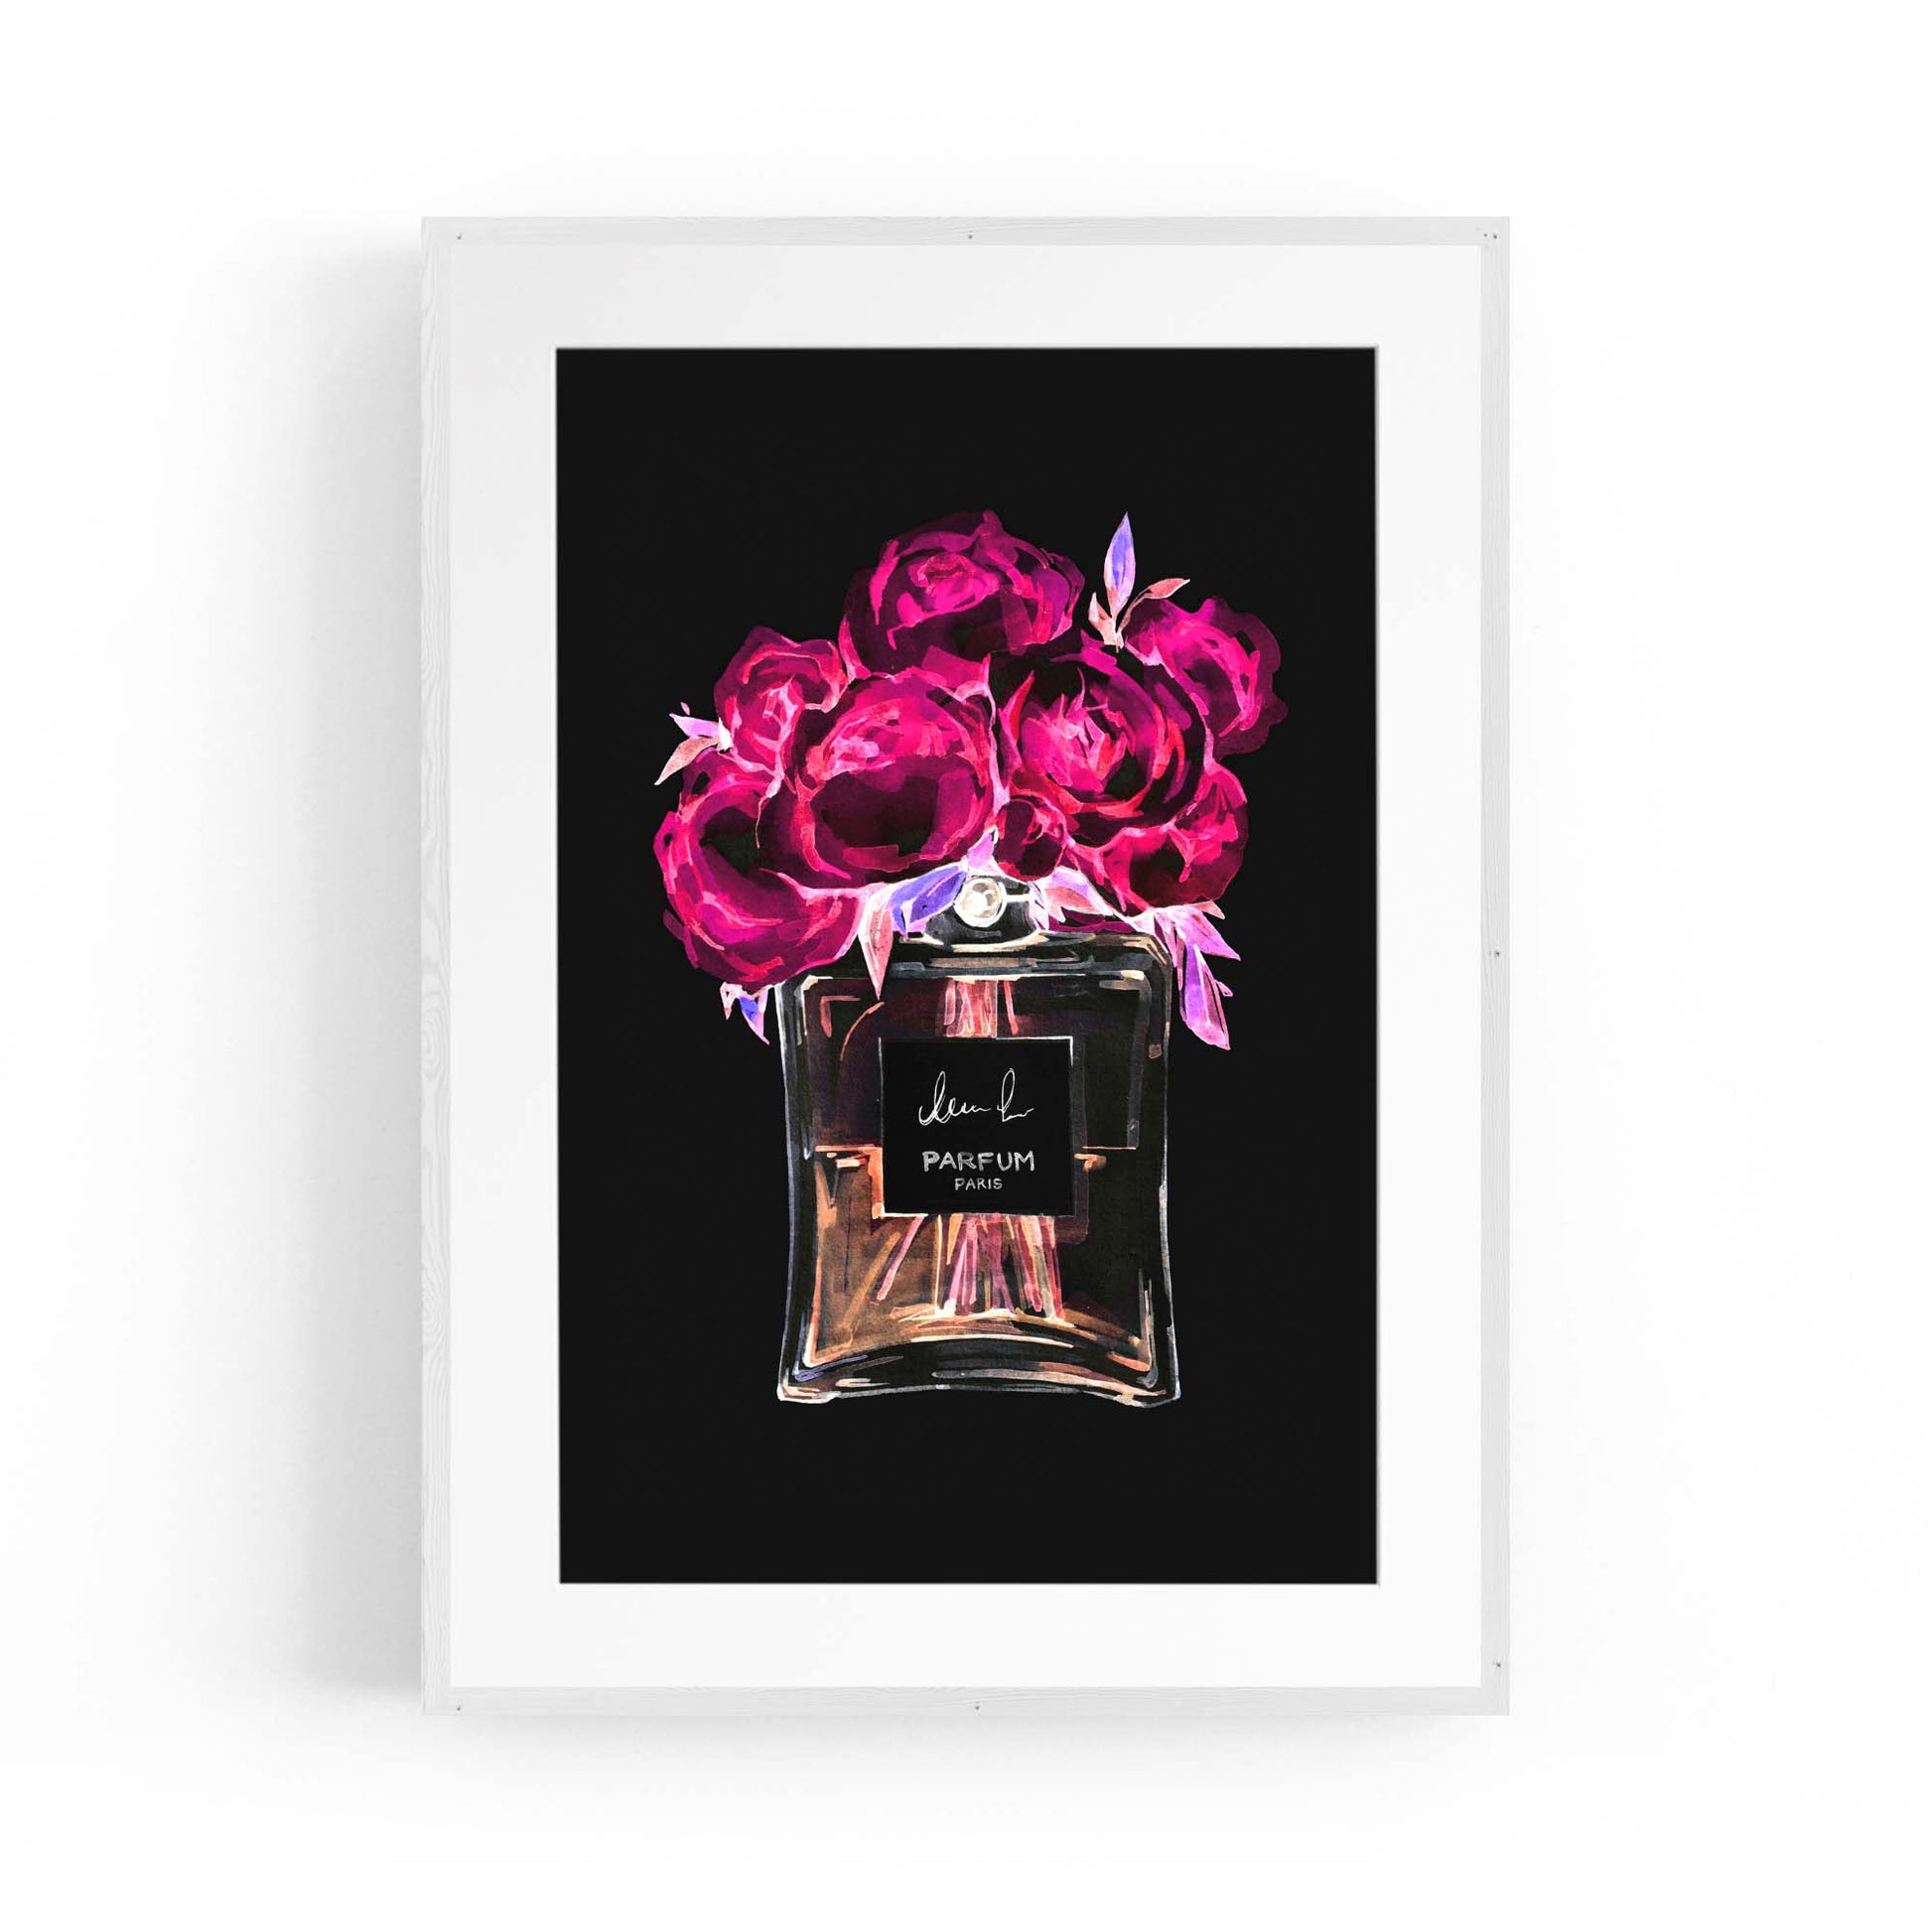 Neon Pink Floral Perfume Bottle Fashion Wall Art - The Affordable Art Company